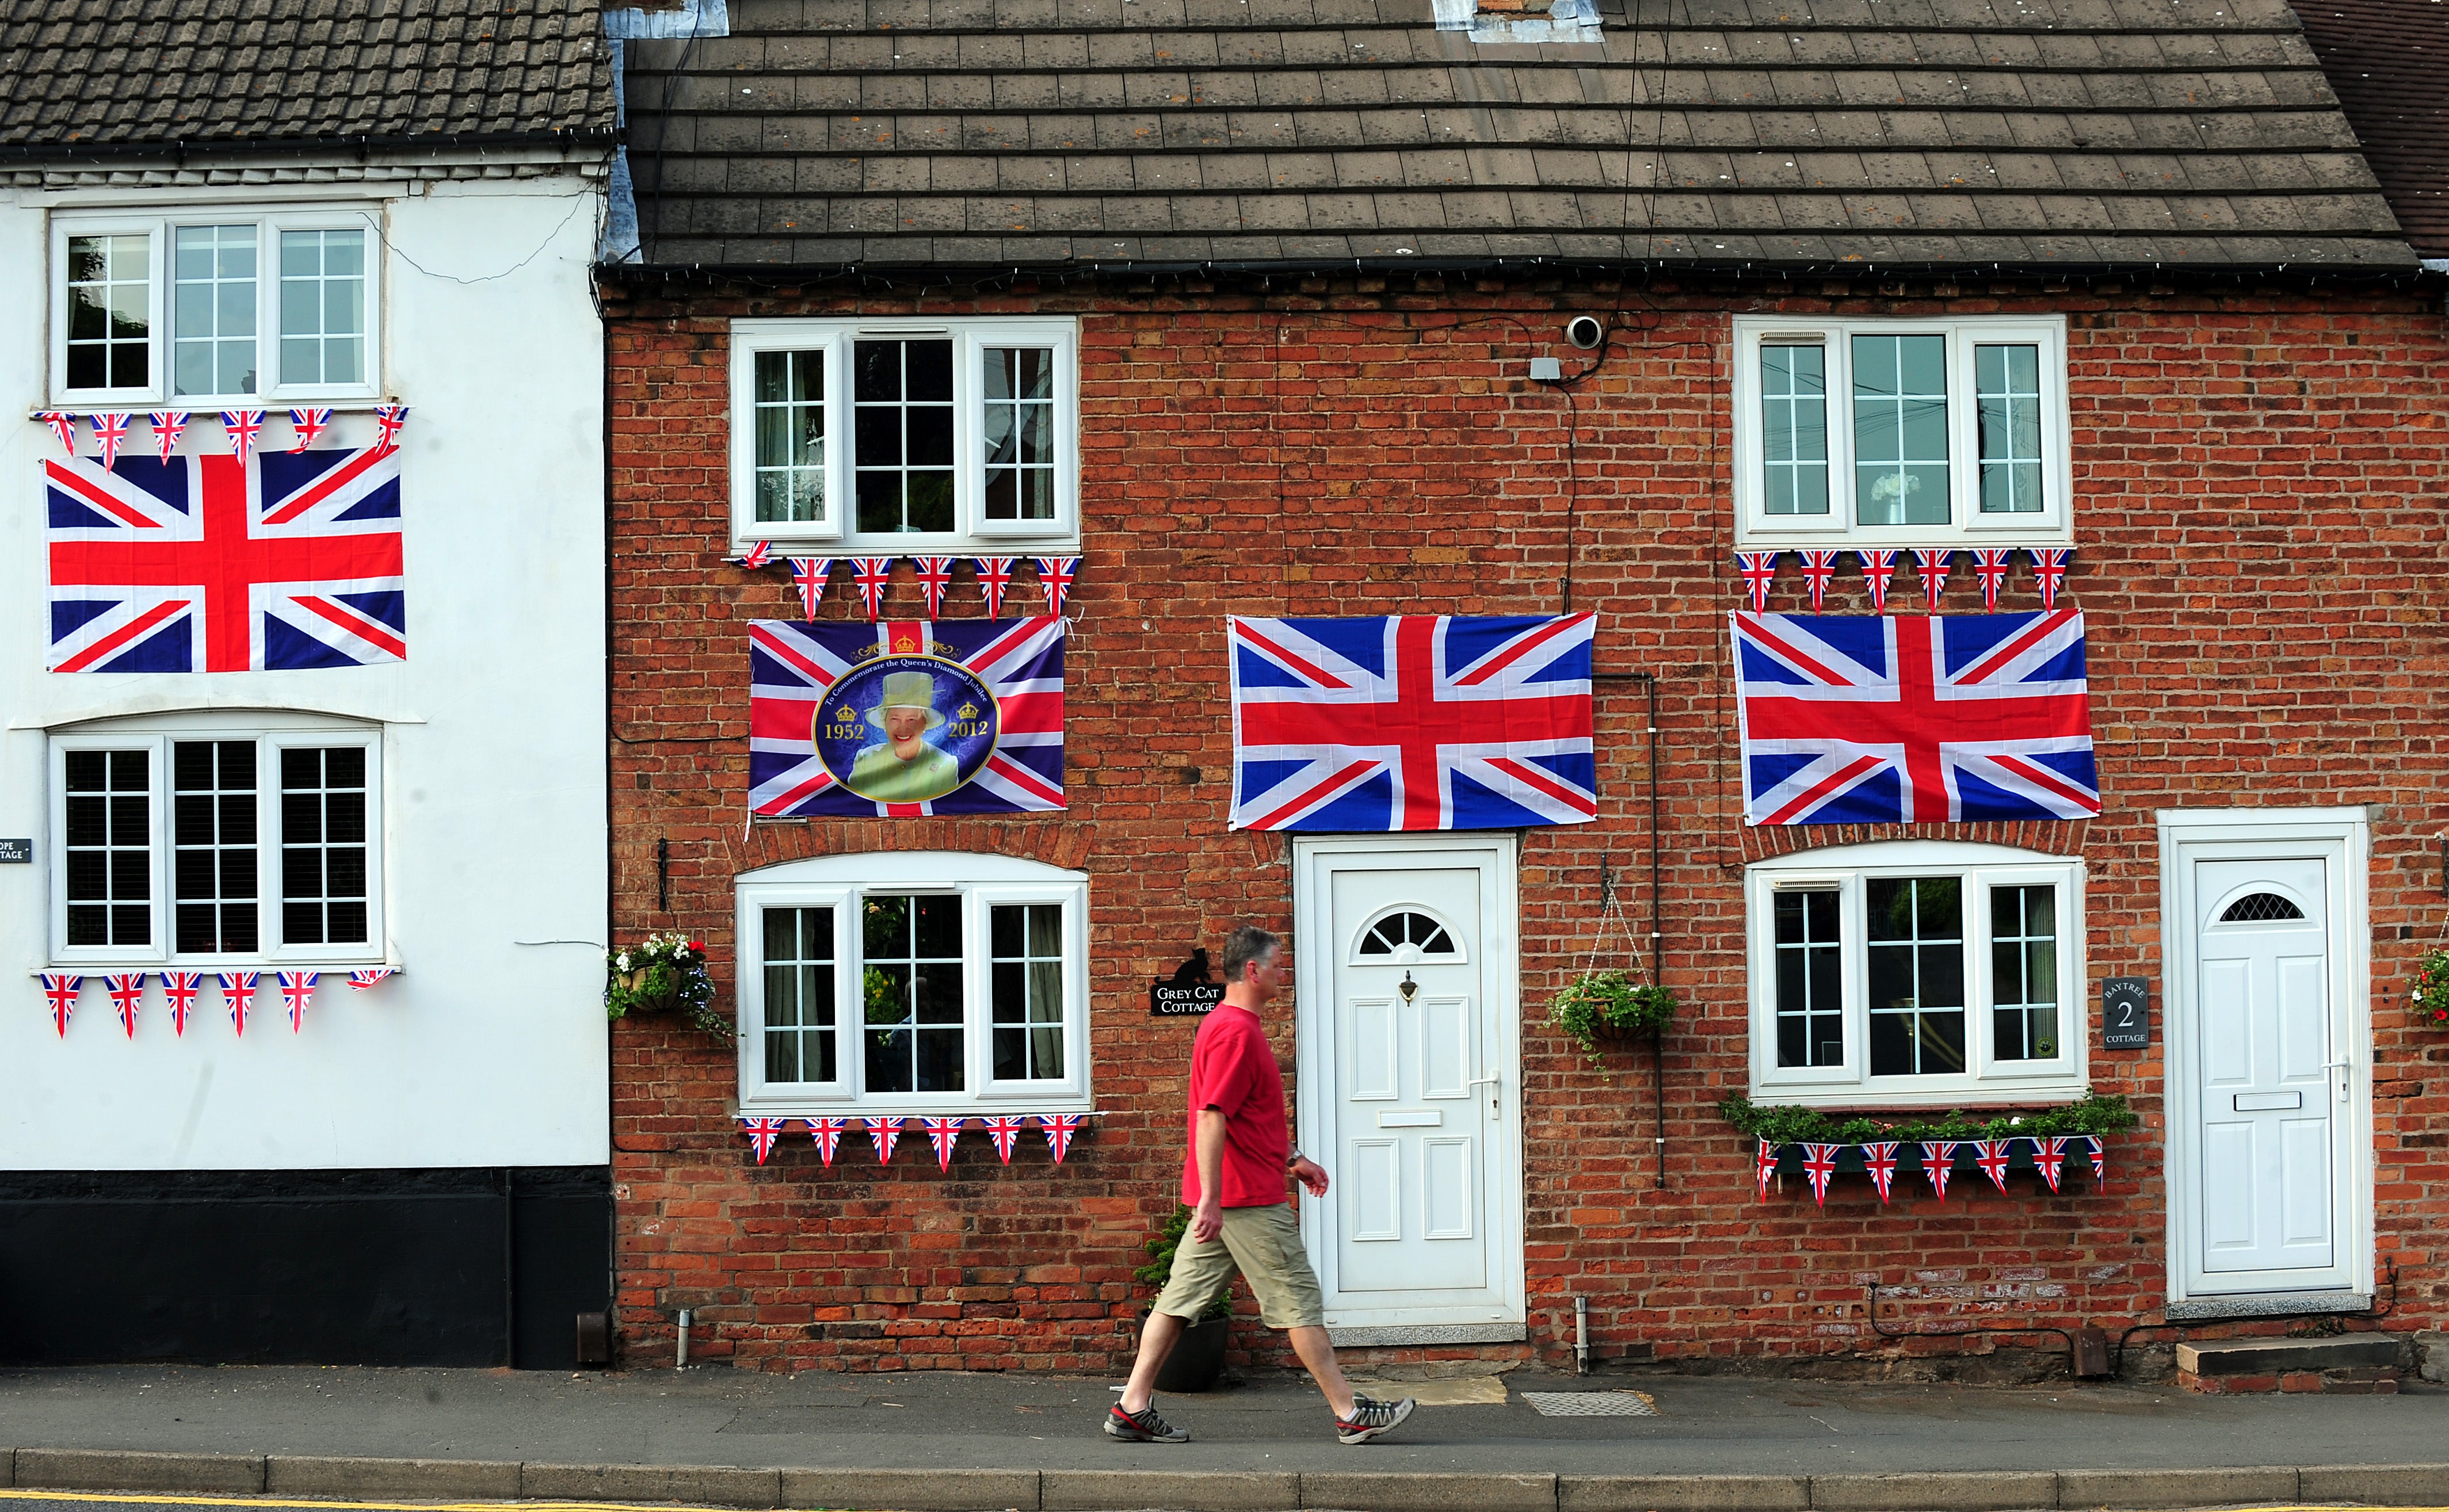 A house in Kegworth, Leicestershire hangs out Union Jack flags in preparation for the Diamond Jubilee celebrations.